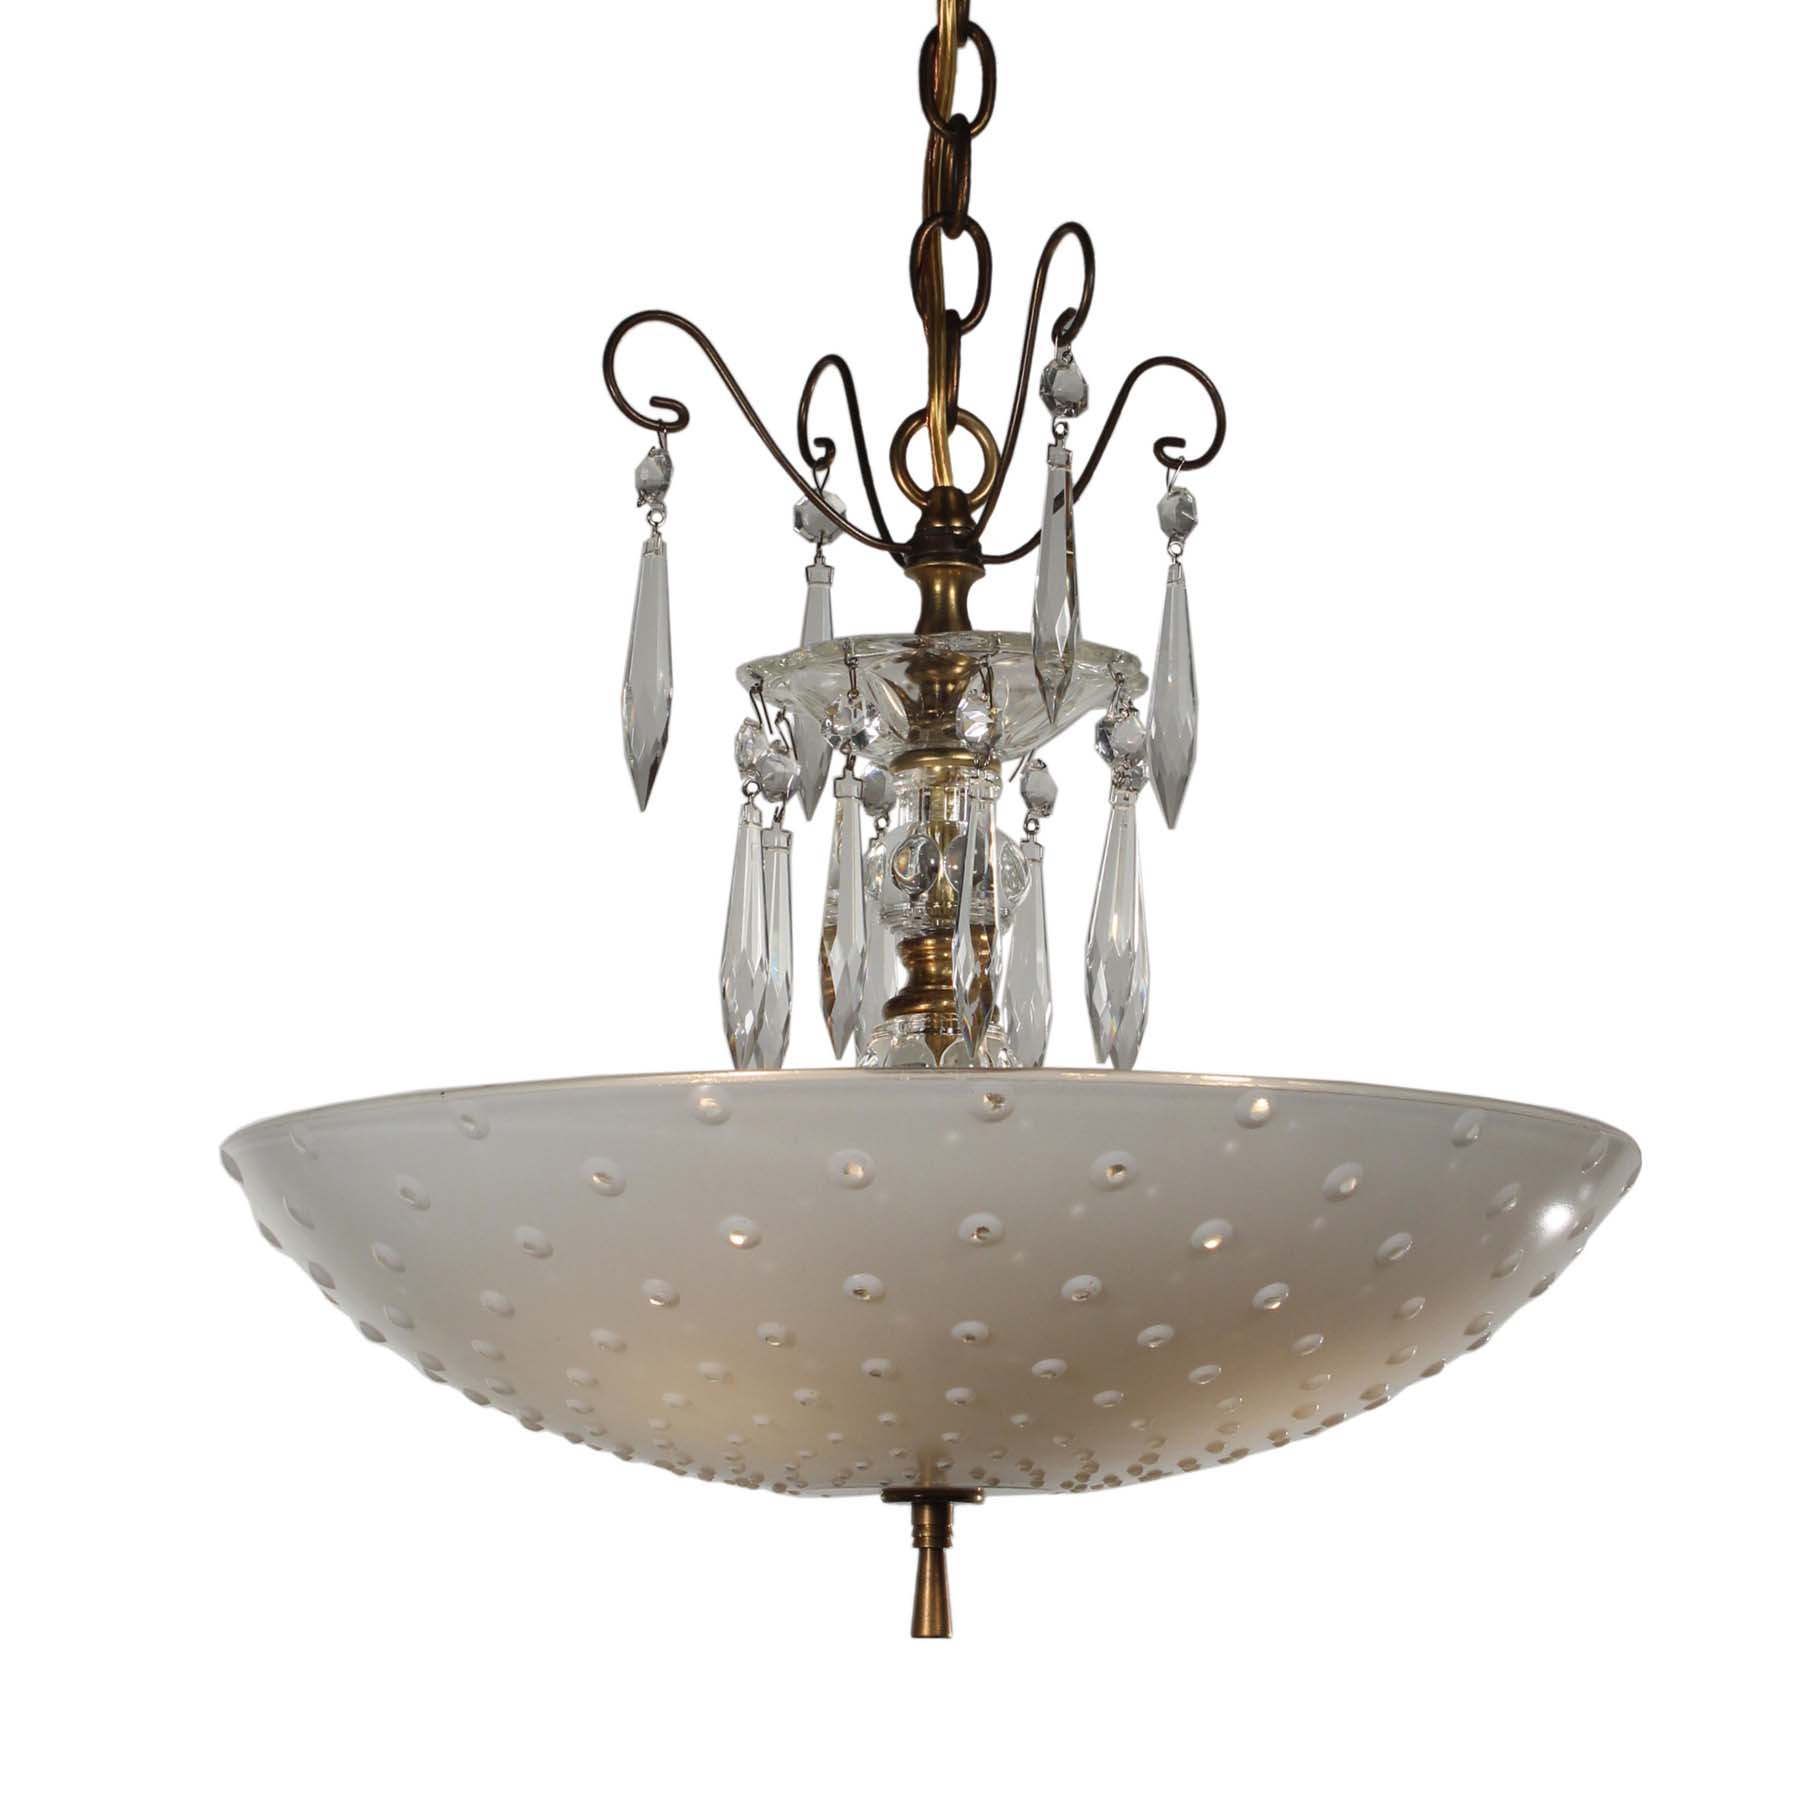 SOLD Vintage Brass Pendant Light with Hobnail Glass Shade, c.1940-0